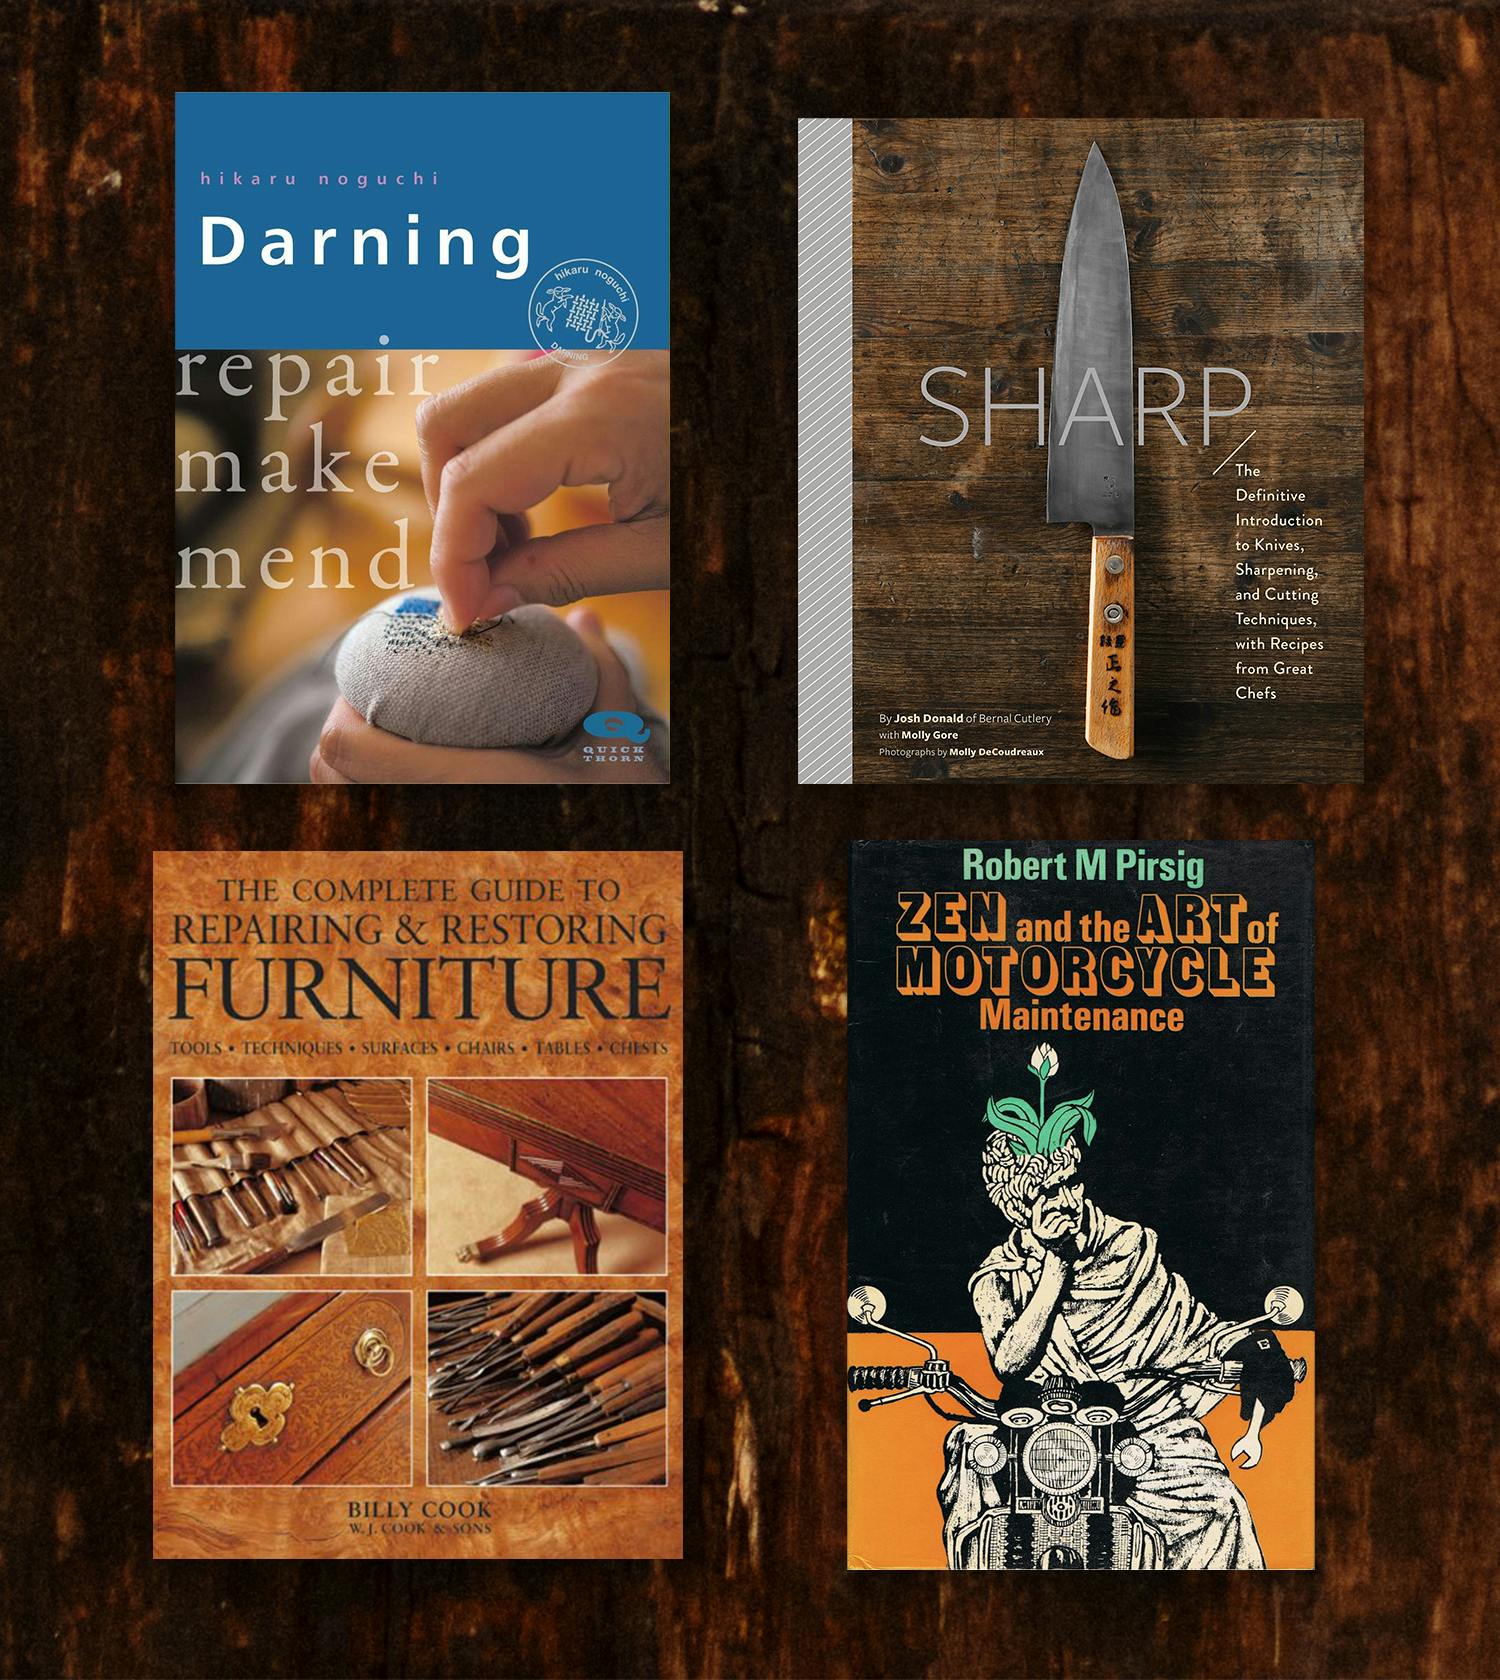 Sharp: The Definitive Introduction to Knives, Sharpening, and Cutting Techniques, with Recipes from Great Chefs [Book]